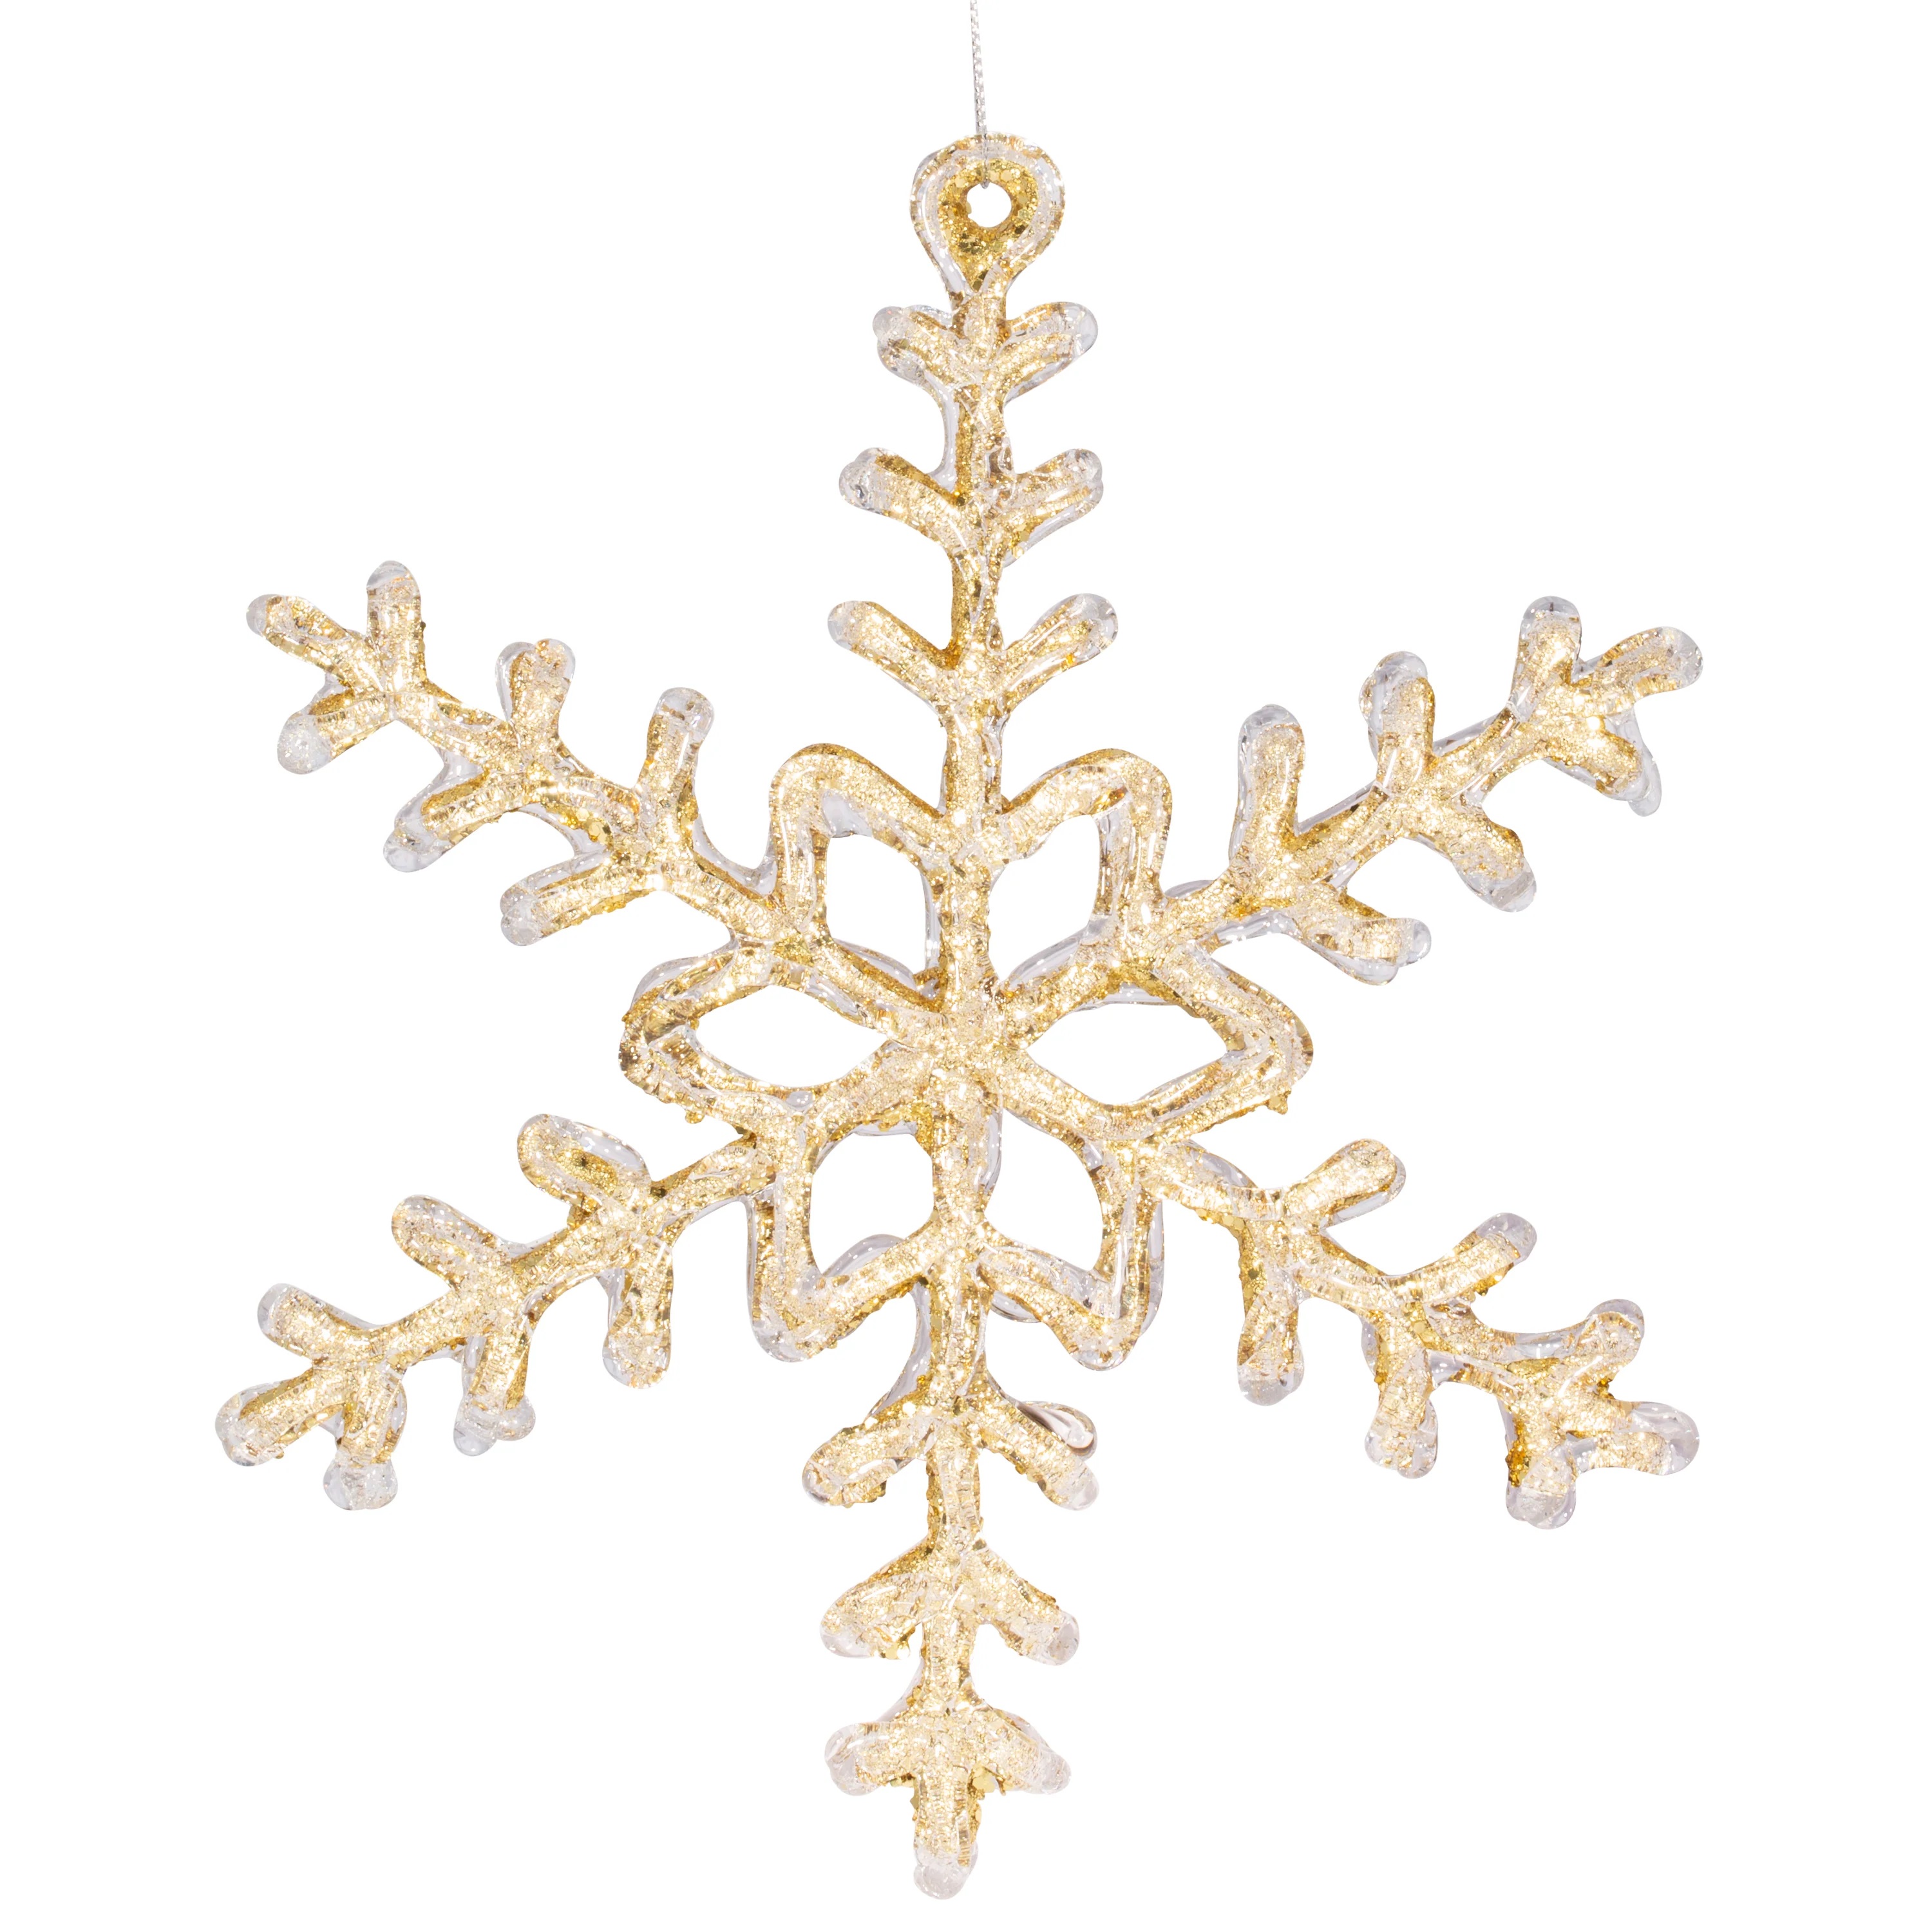 62 x Gold Snowflake Hanging Ornament - Large